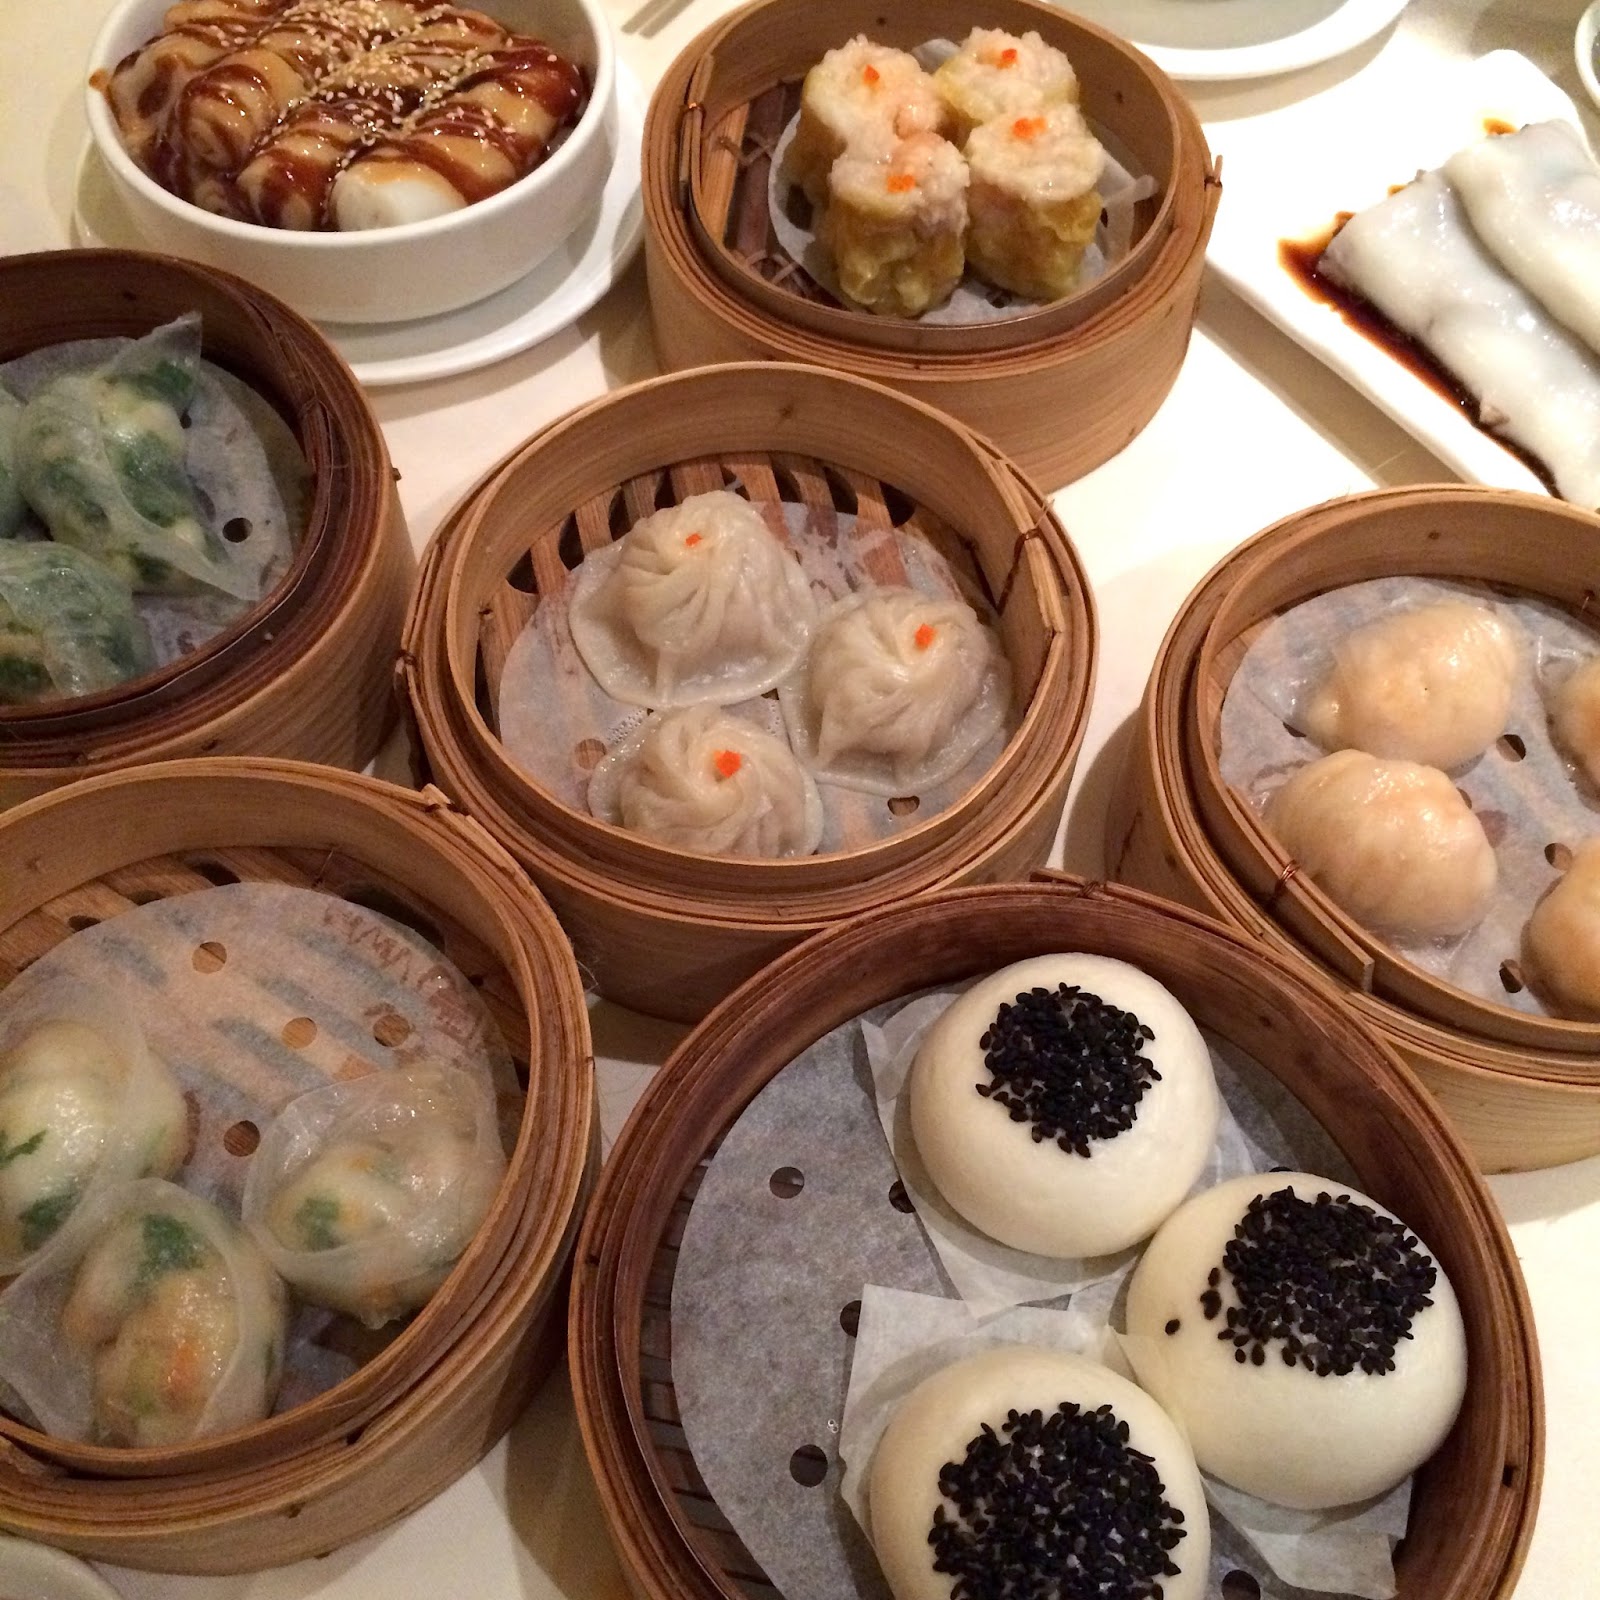 Royal China Queensway, The Best Dim Sum in London / LUCY LOVES TO EAT